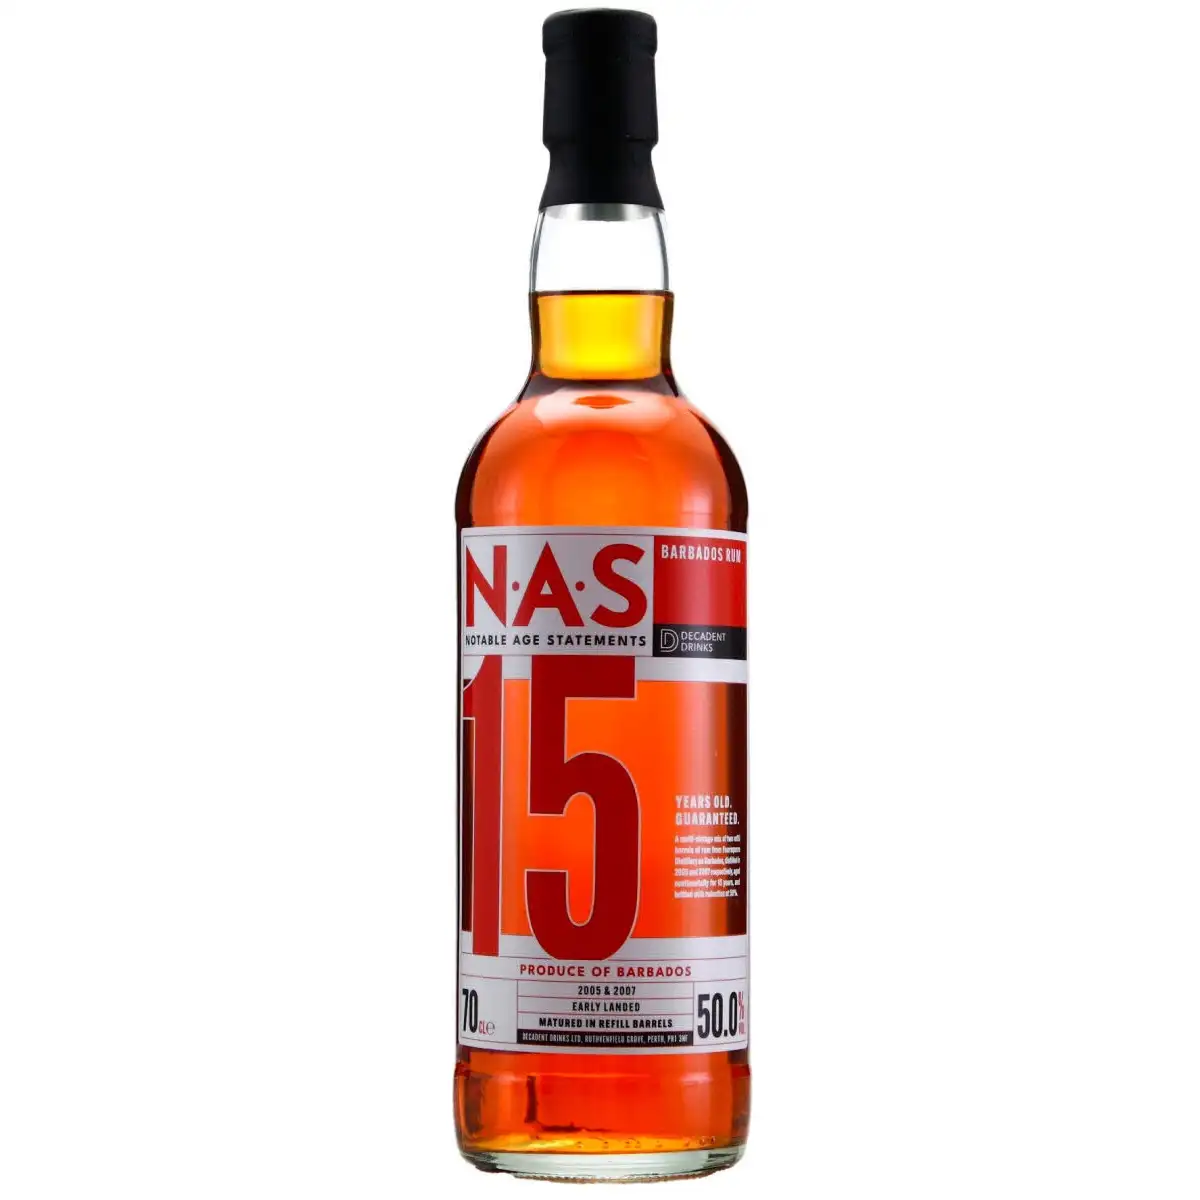 Image of the front of the bottle of the rum Rum Sponge NAS 15 (2005 & 2007)